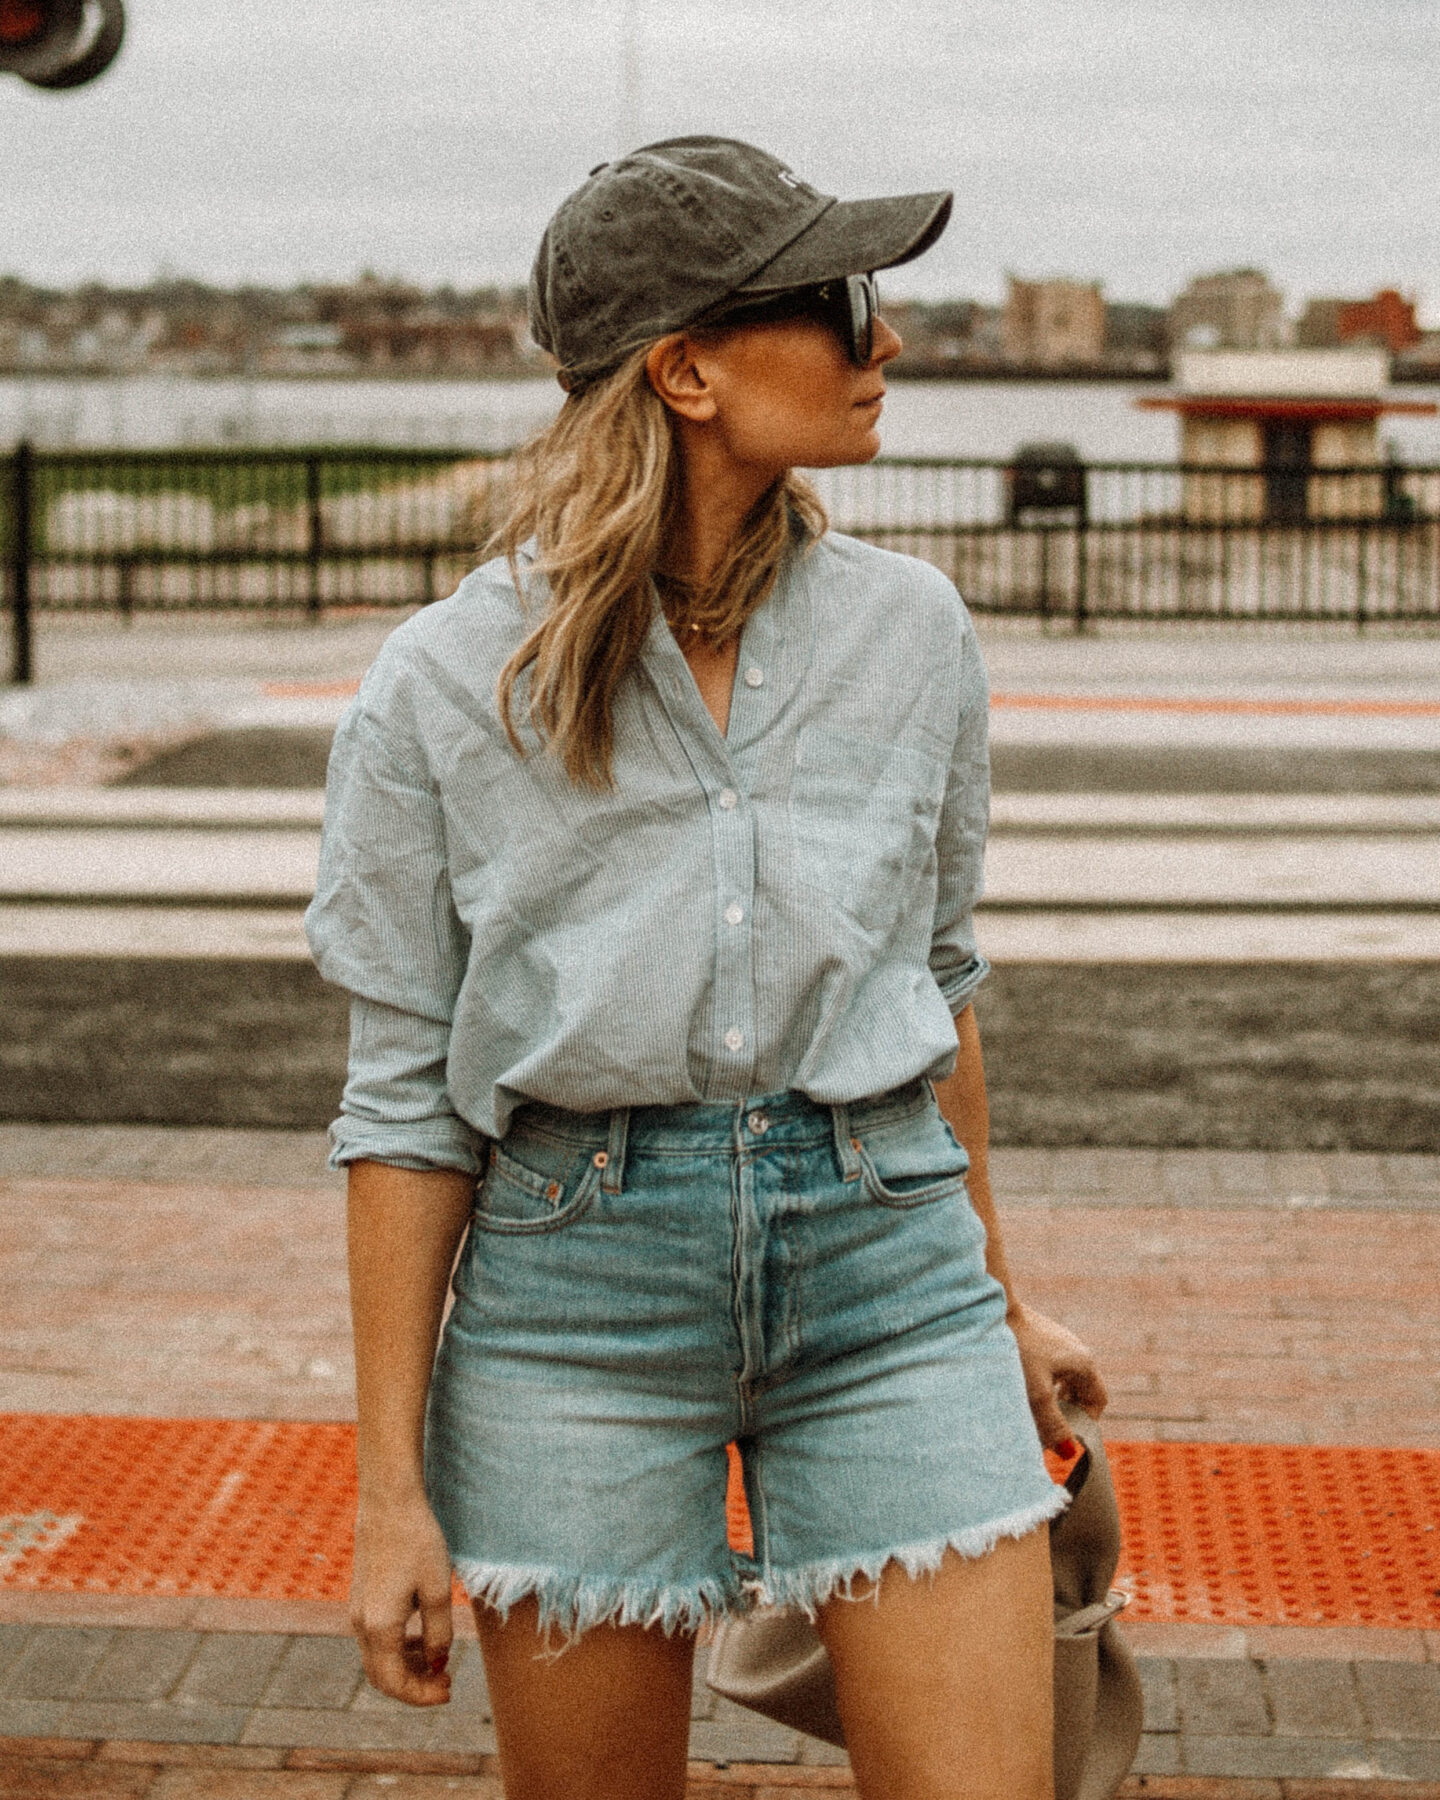 Denim Short Guide 2021 - Styles You'll Love for Years